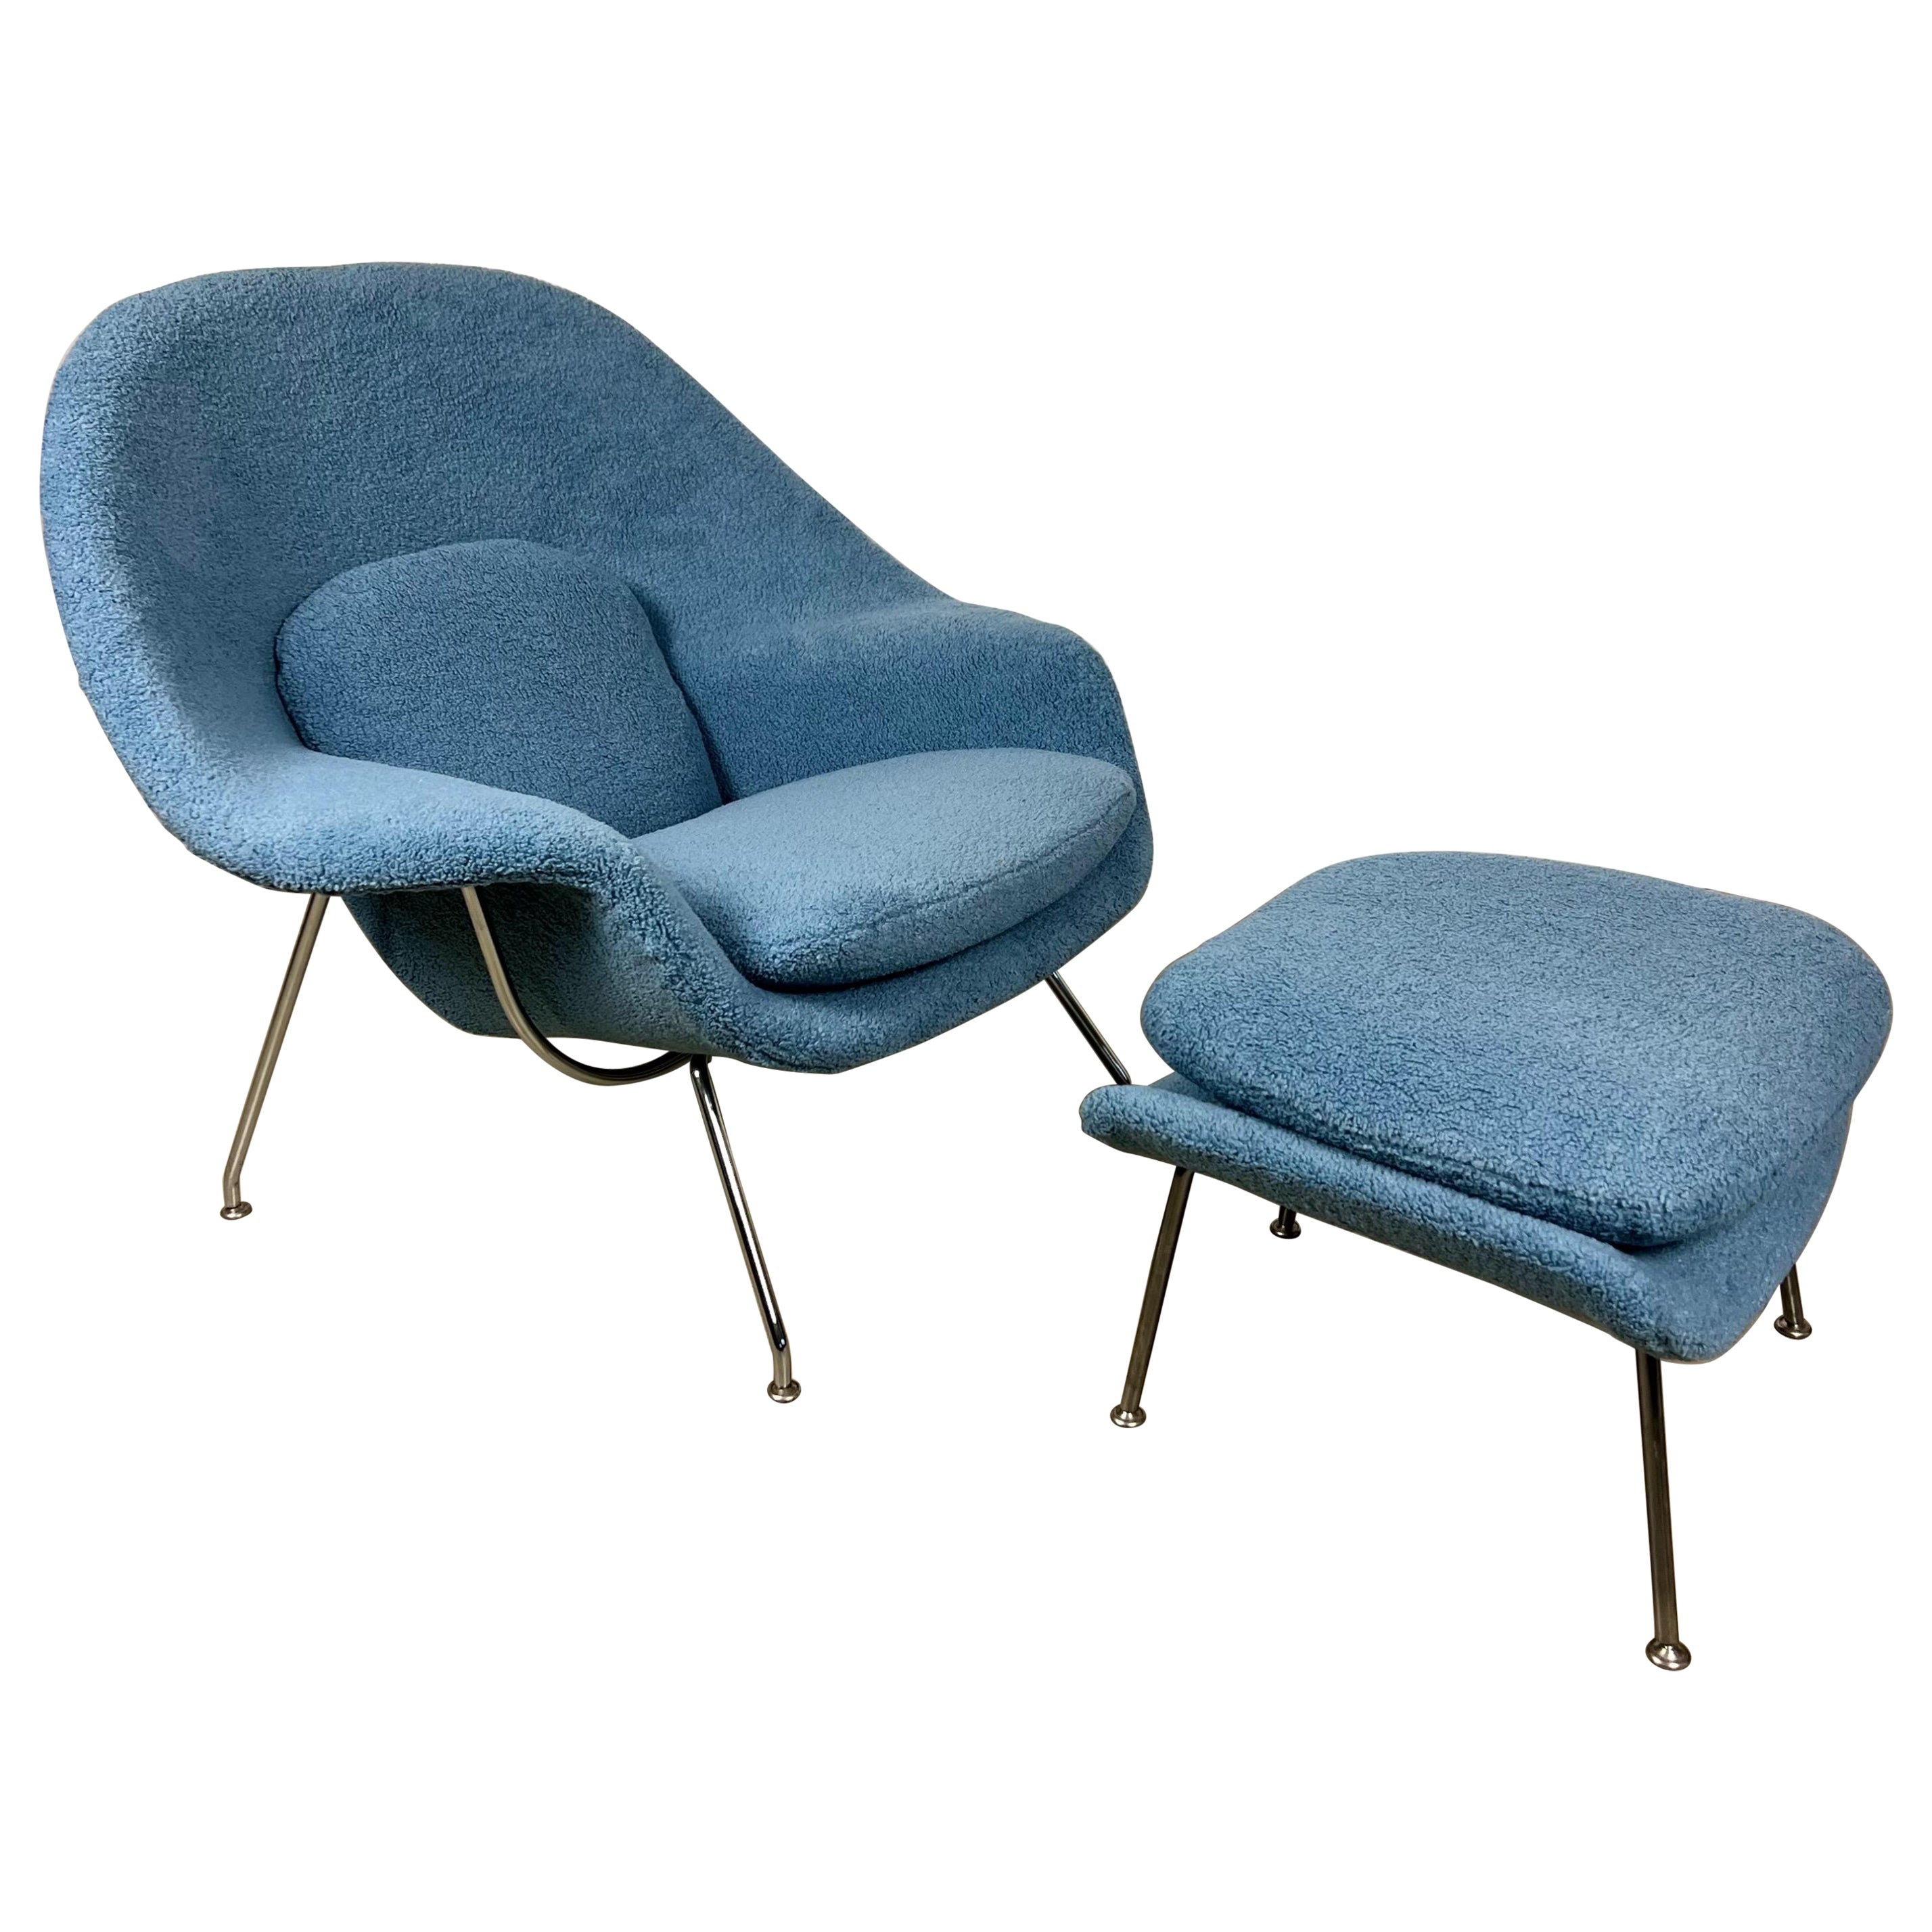 Eero Saarinen for Knoll womb chair and ottoman in Nick Cave Shearling For Sale